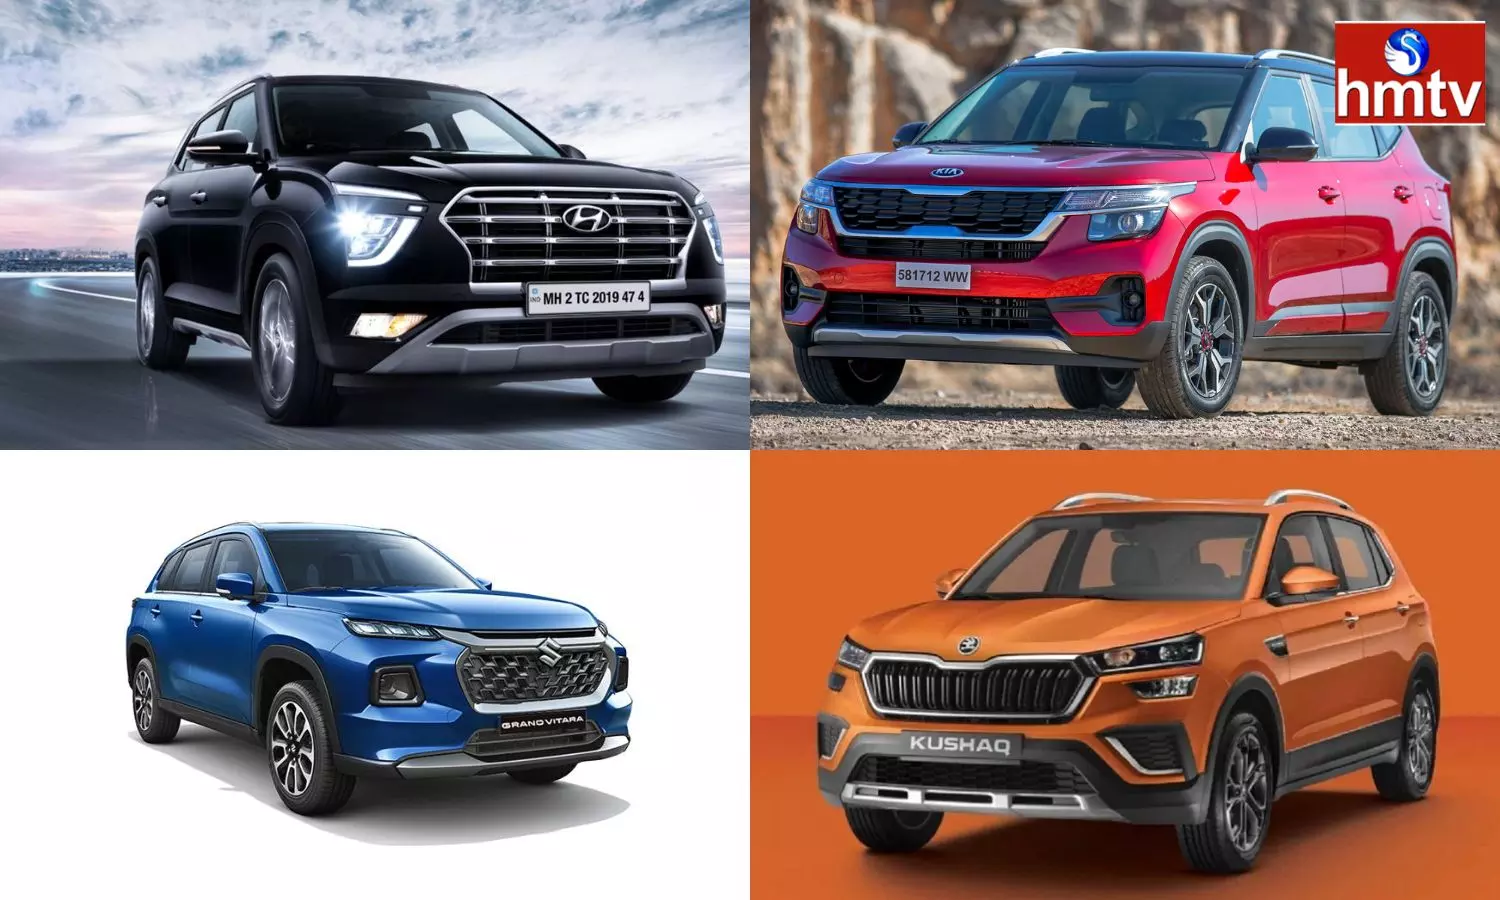 These 5 SUV Cars Are Number One In Mileage Runs Up To 28 Km Per 1 Liter